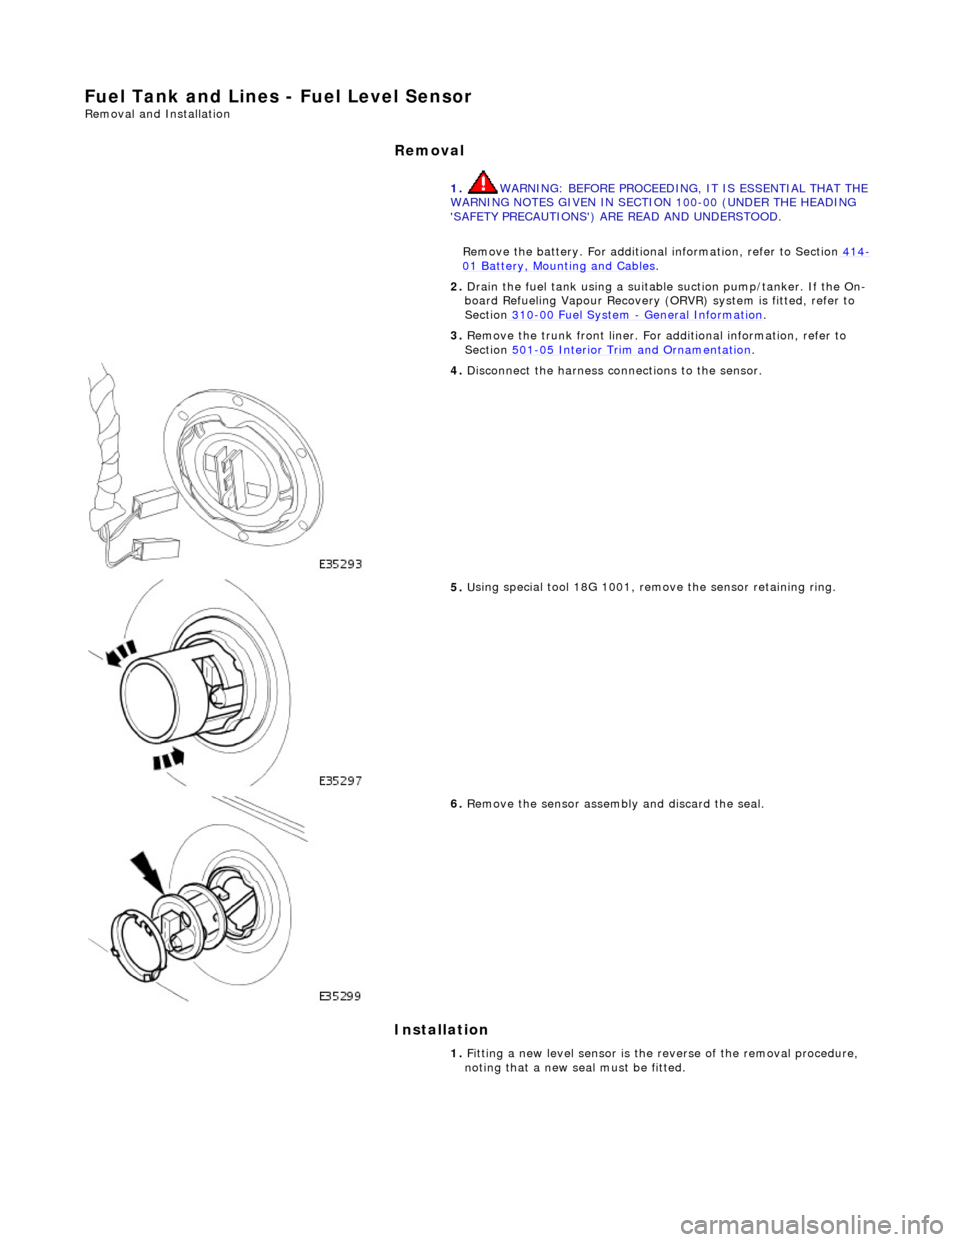 JAGUAR X308 1998 2.G Service Manual Fu
 el Tank and Lines - Fuel Level Sensor 
Remov
a
 l and Installation 
Removal
 
Ins
 tallation 
 
  1.
  WA
 RNING: BEFORE PROCEEDING, IT IS ESSENTIAL THAT THE 
WARNING NOTES GIVEN IN SECTIO N 100-0